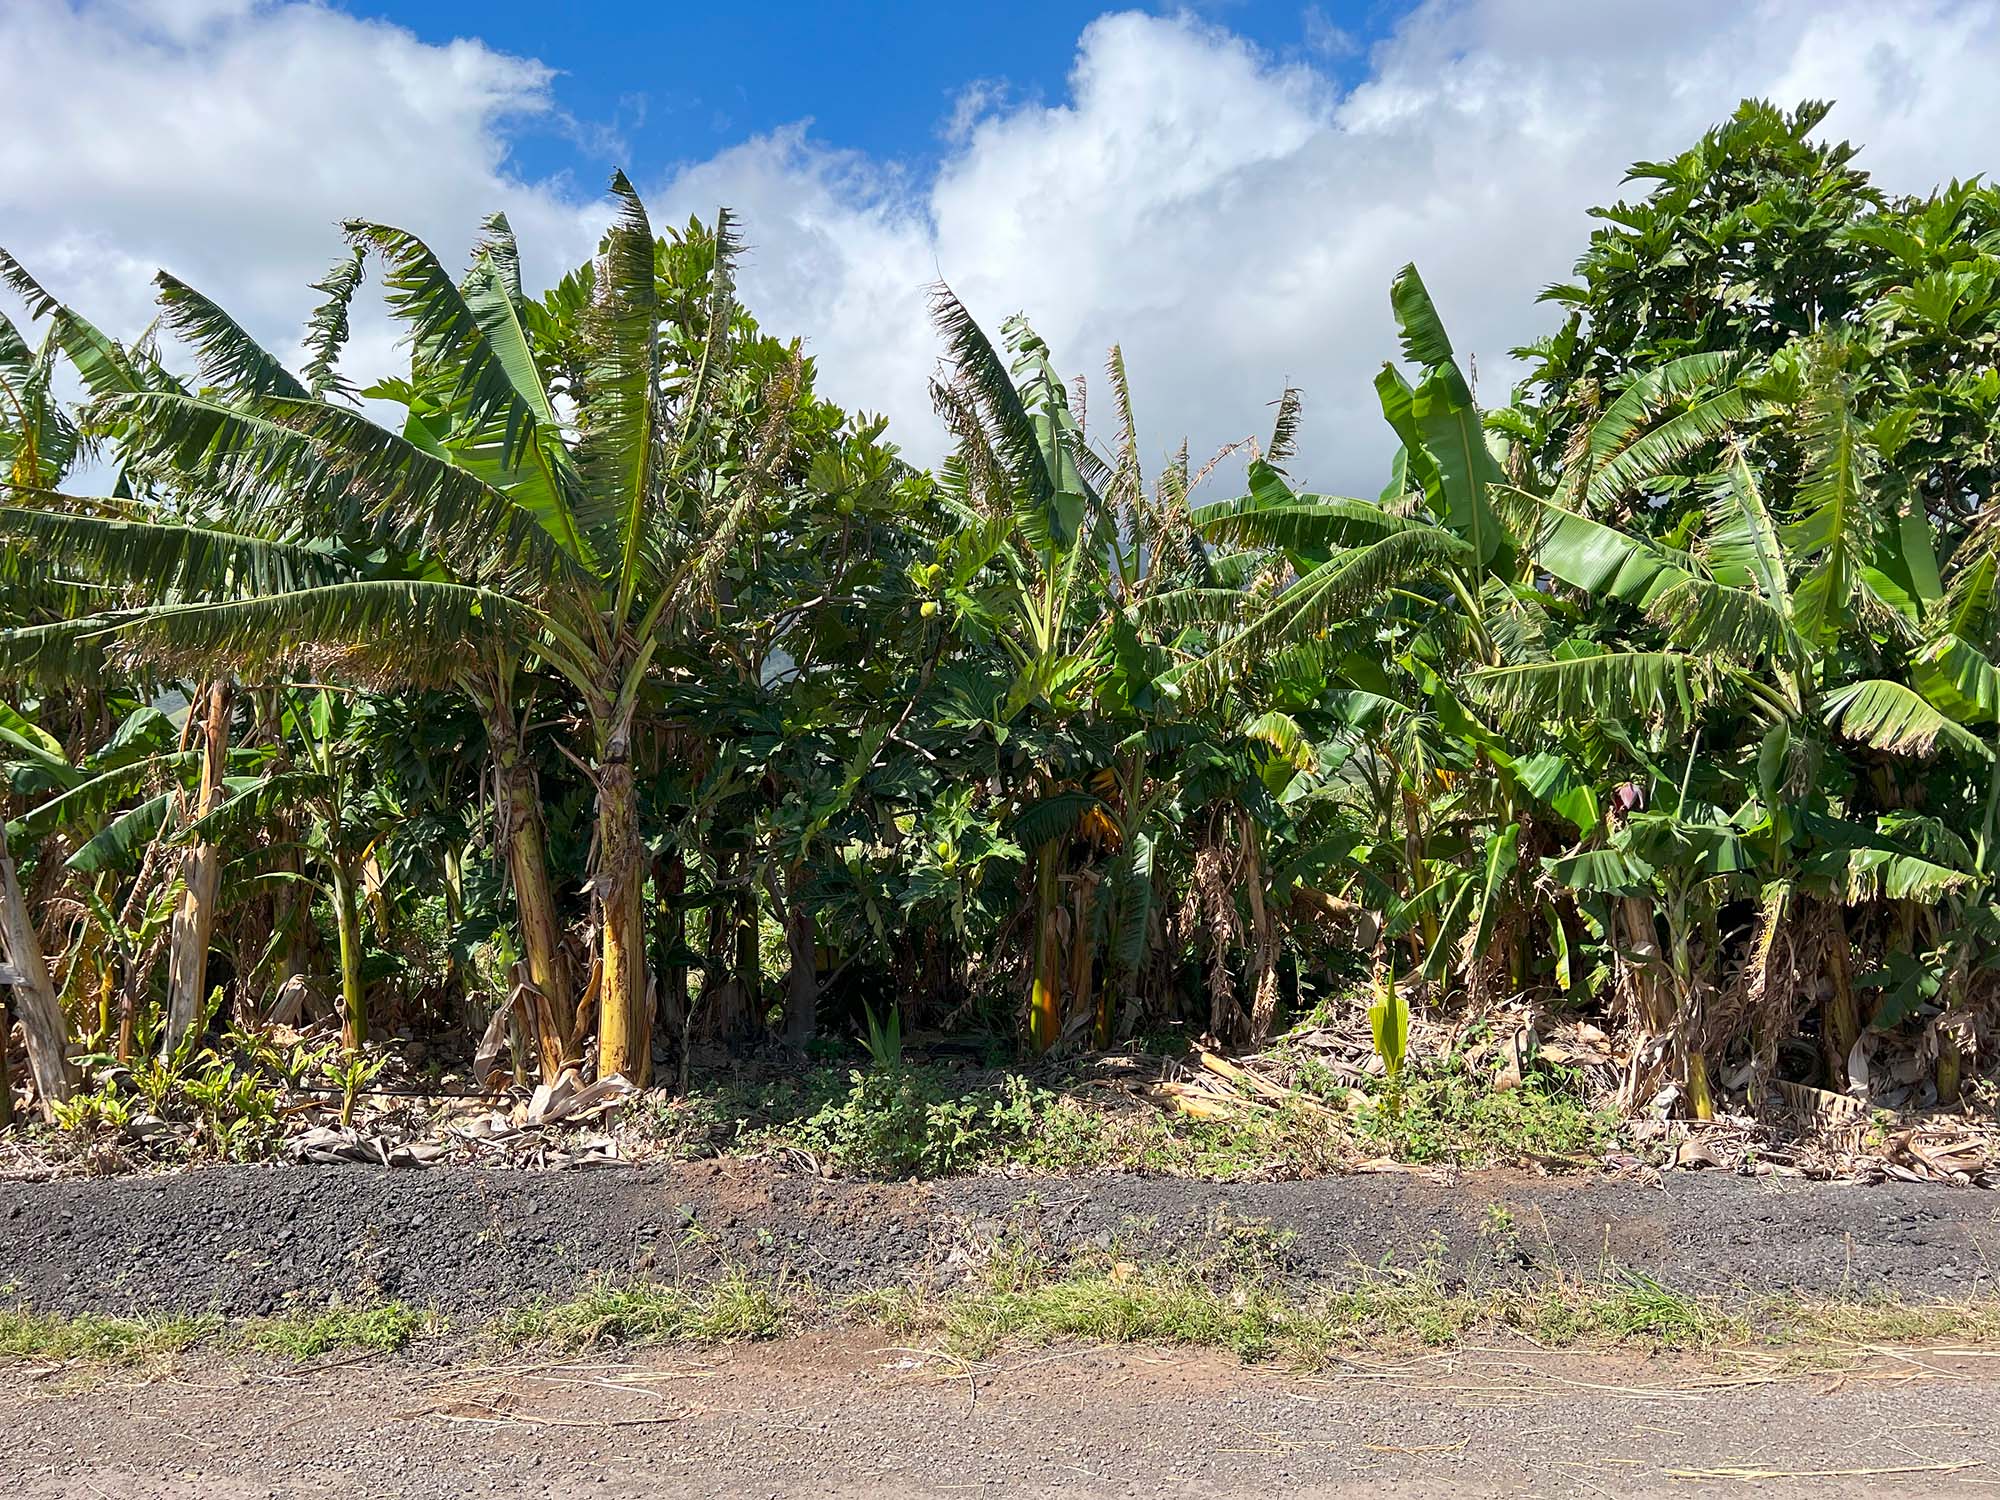 A perimeter windbreak of palms, bananas, and bamboo protects both the main cash crops and the agroforestry teaching garden.